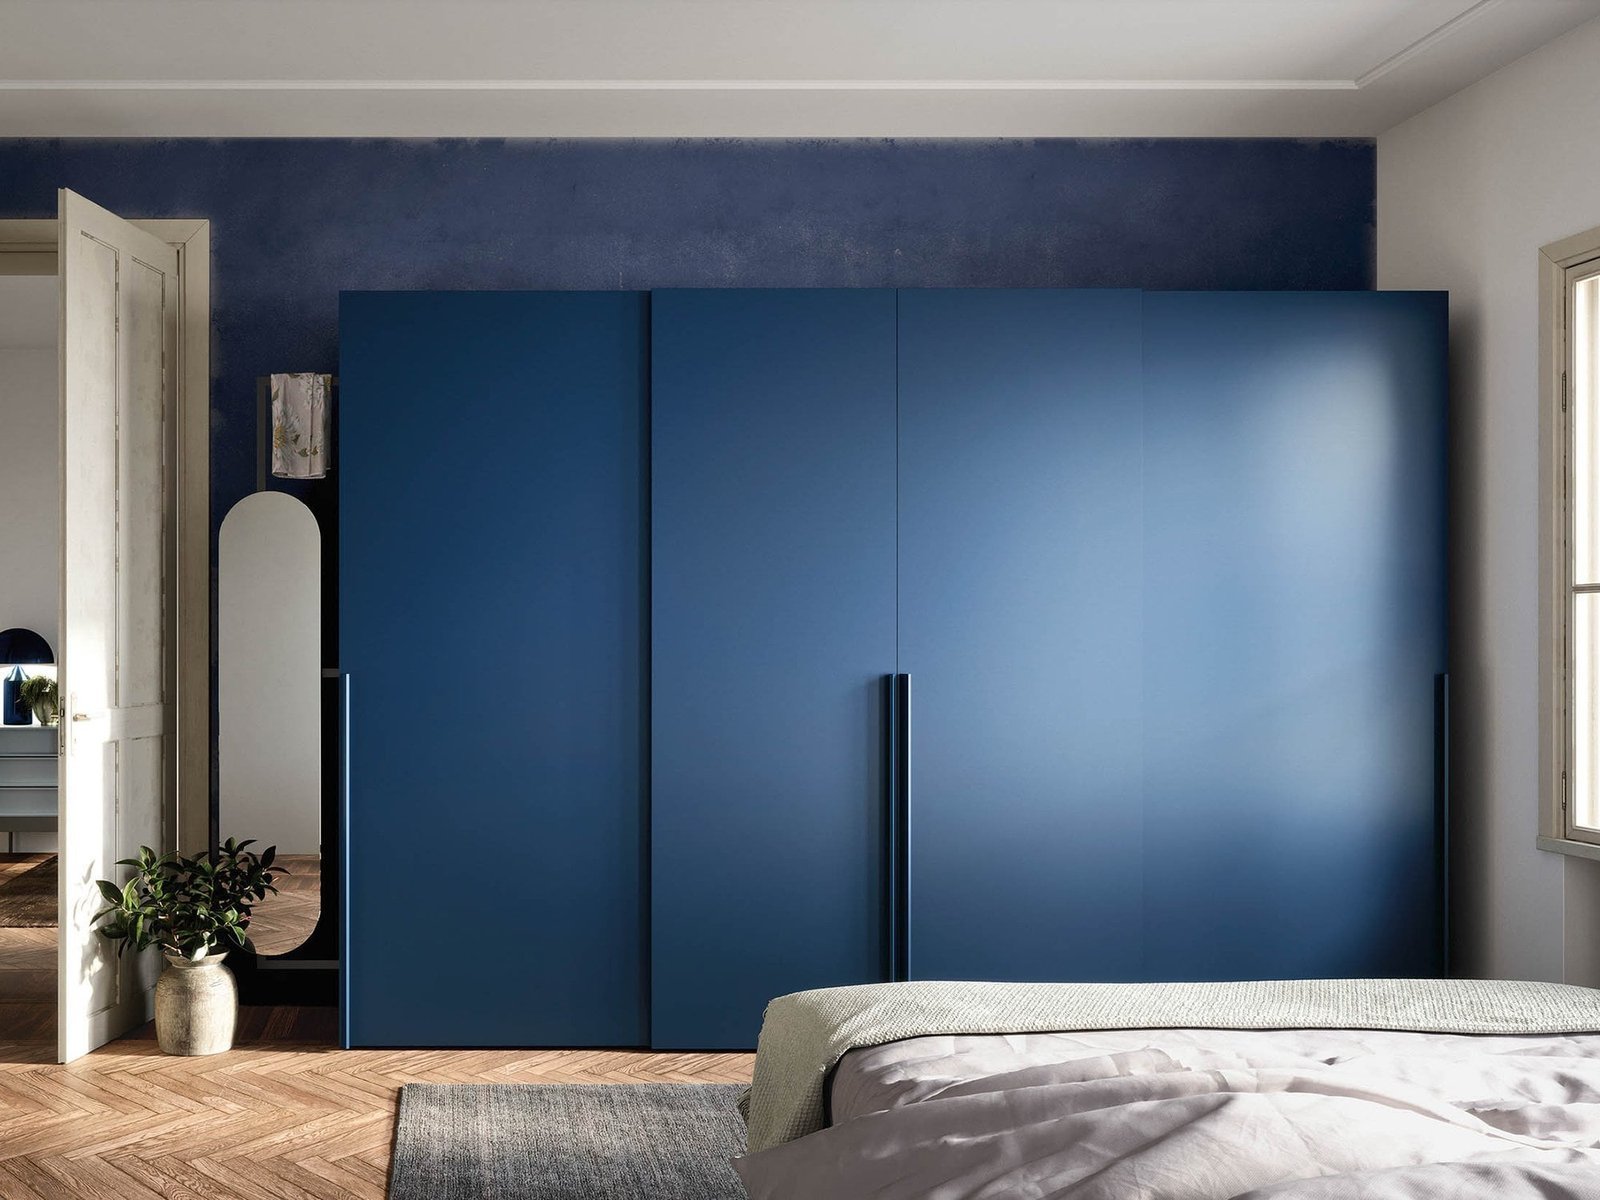 Custom Fitted Wardrobes, Bespoke Furniture Manchester, Fitted Bedroom Furniture, Made To Measure Wardrobes, Fitted Wardrobes Manchester, Custom Wardrobe Installation, Fitted Sliding Wardrobes, Built-In Wardrobes Manchester, Fitted Furniture Specialists, Manchester Fitted Wardrobes